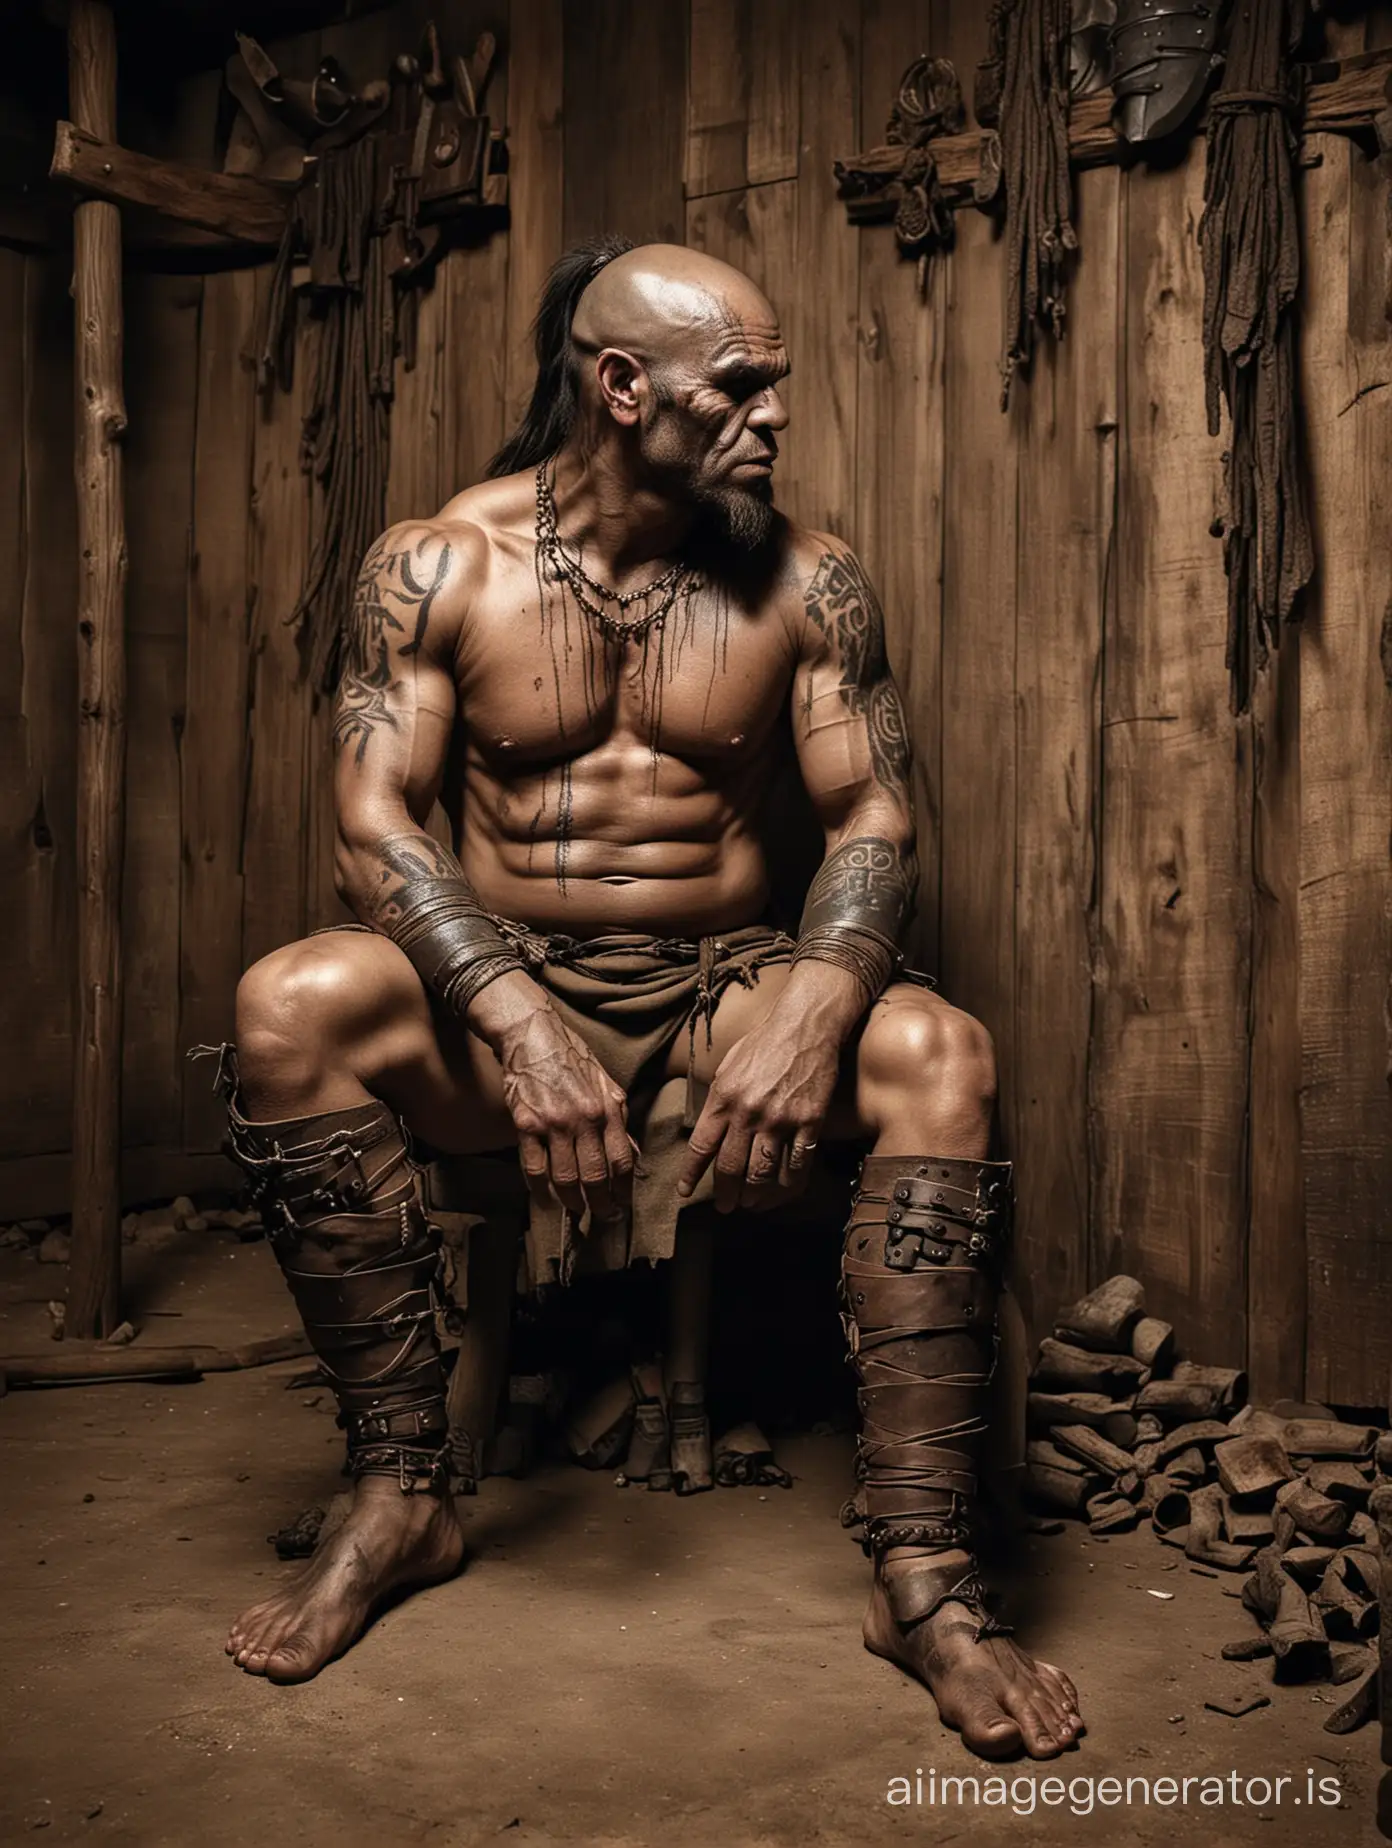 Dramatic picture. The battle scarred naked orc chieftain,sitting in his wooden hut,  contemplative. Sadness in his eyes. His body, legs, arms, hands and feet are the same brown-greenish color of his face. One color for all skin. Skin is scarred and very dirty covered with dirt and blood and blood is on it. Tribal tattoos adorn his body. Armor on the wall. His battle axe resting against the wall. night. Gritty, dirty. wide angle shot, dramatic, dark, lighting from torches in the corners and a fire in the hearth. Lonely. The trophies of his battles on the wall. Food on the dirt floor. HIgh contrast